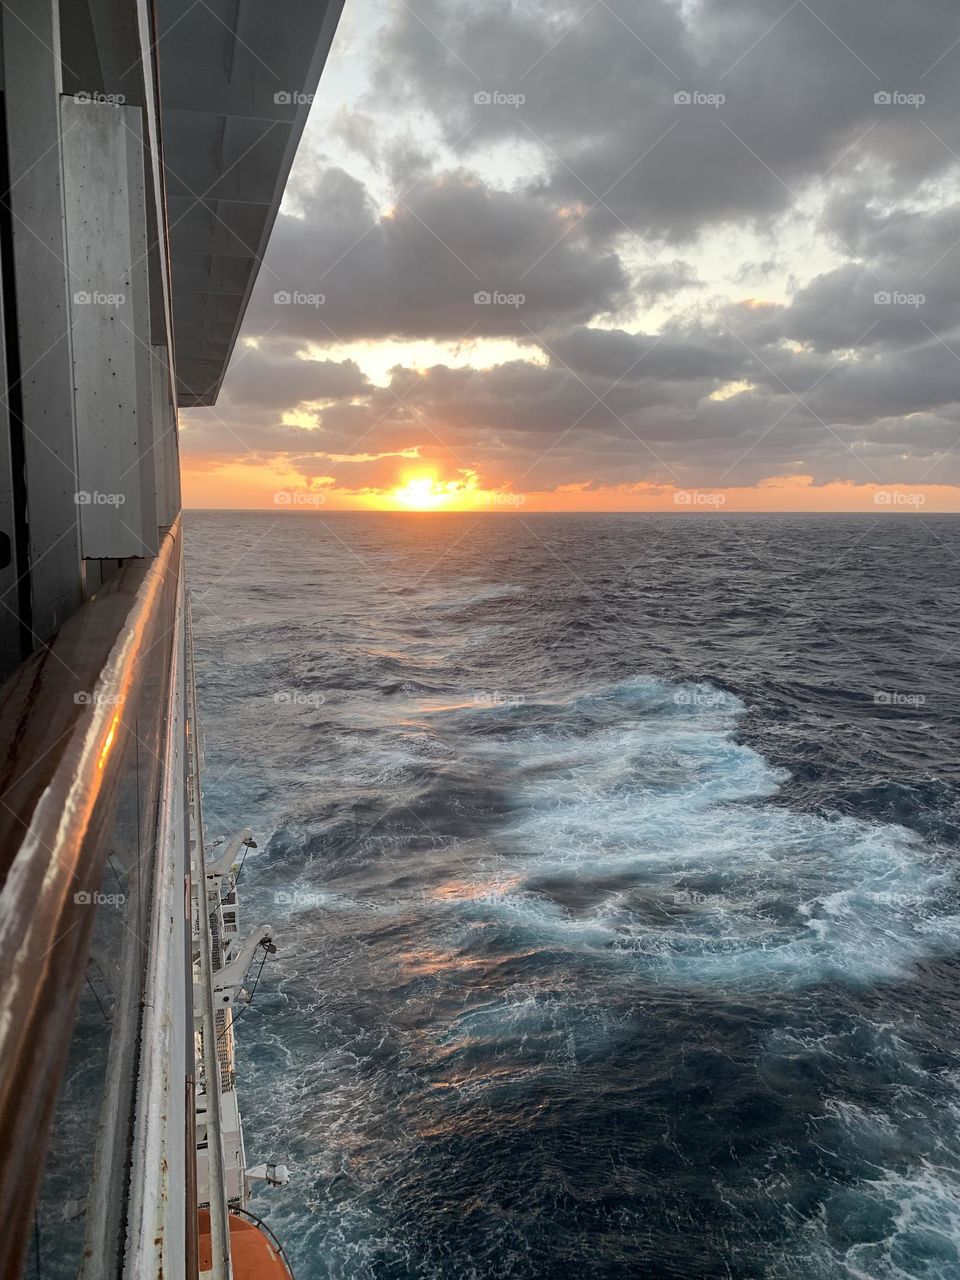 Sunset over the ocean in the Caribbean on cruise ship